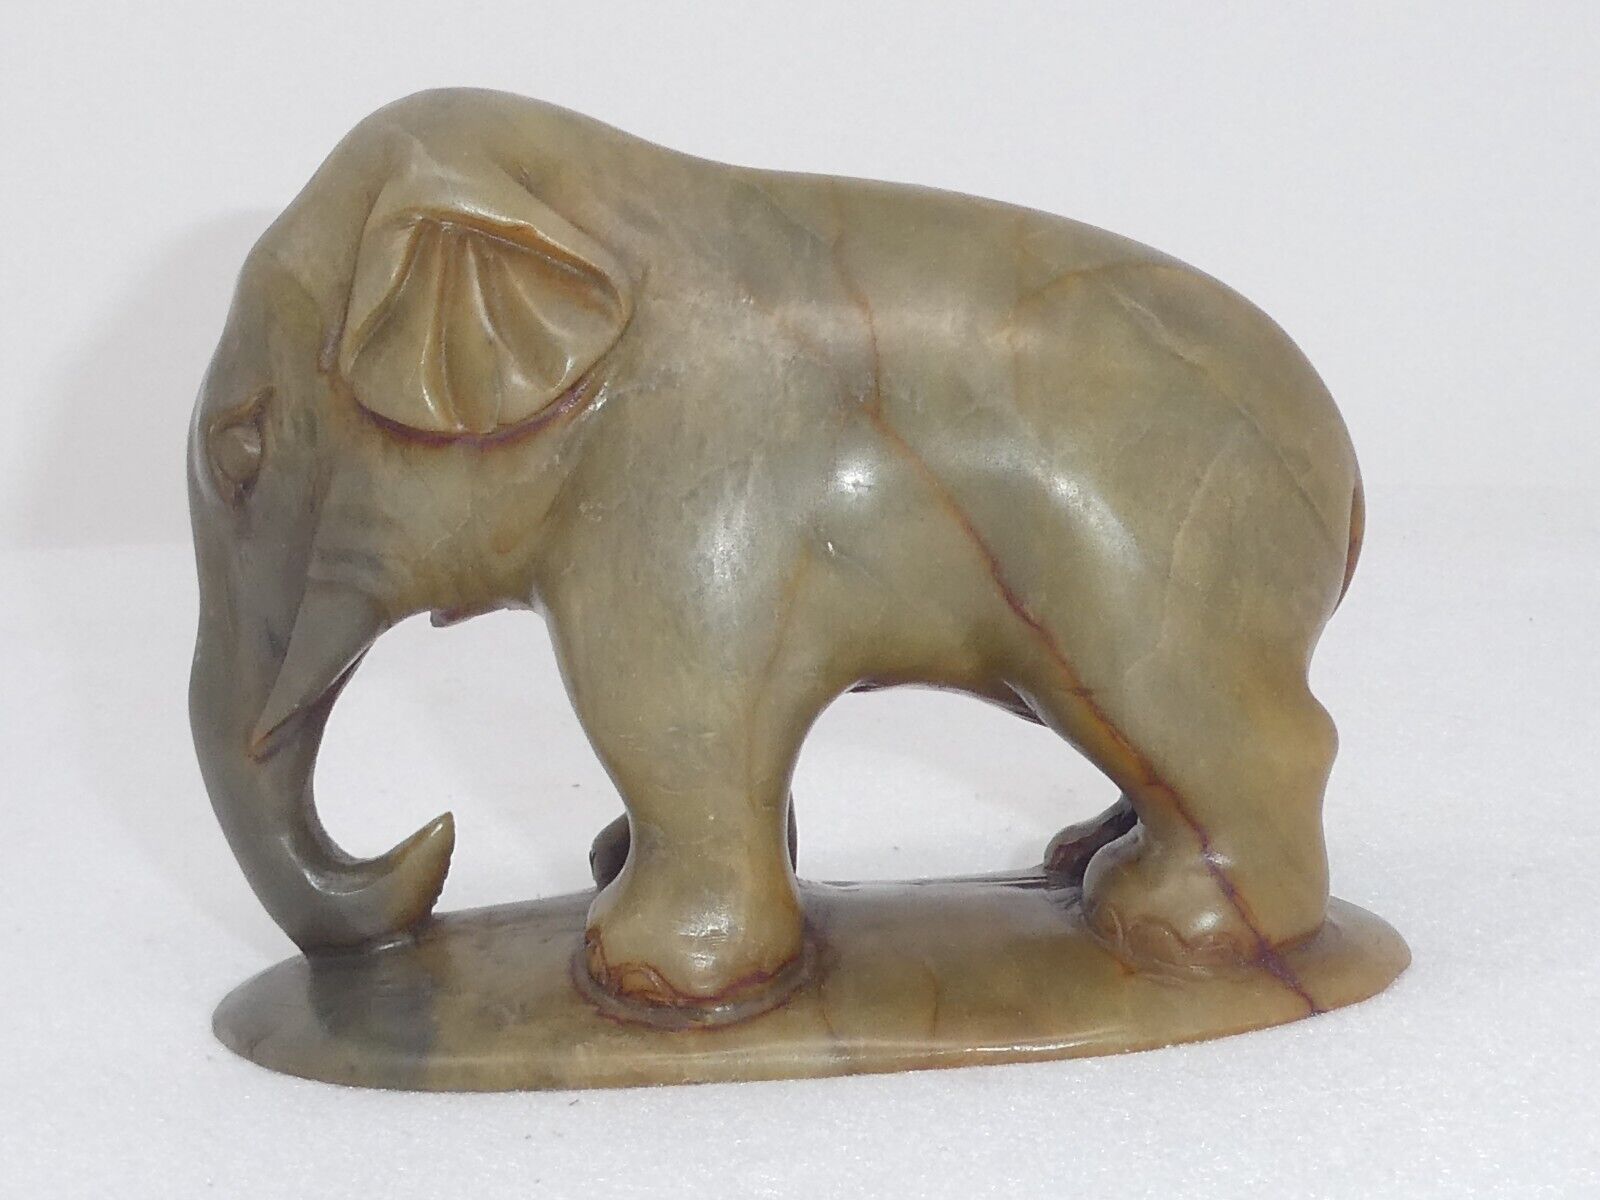 VINTAGE HAND CARVED STONE ELEPHANT HEAVY FIGURINE PAPERWEIGHT